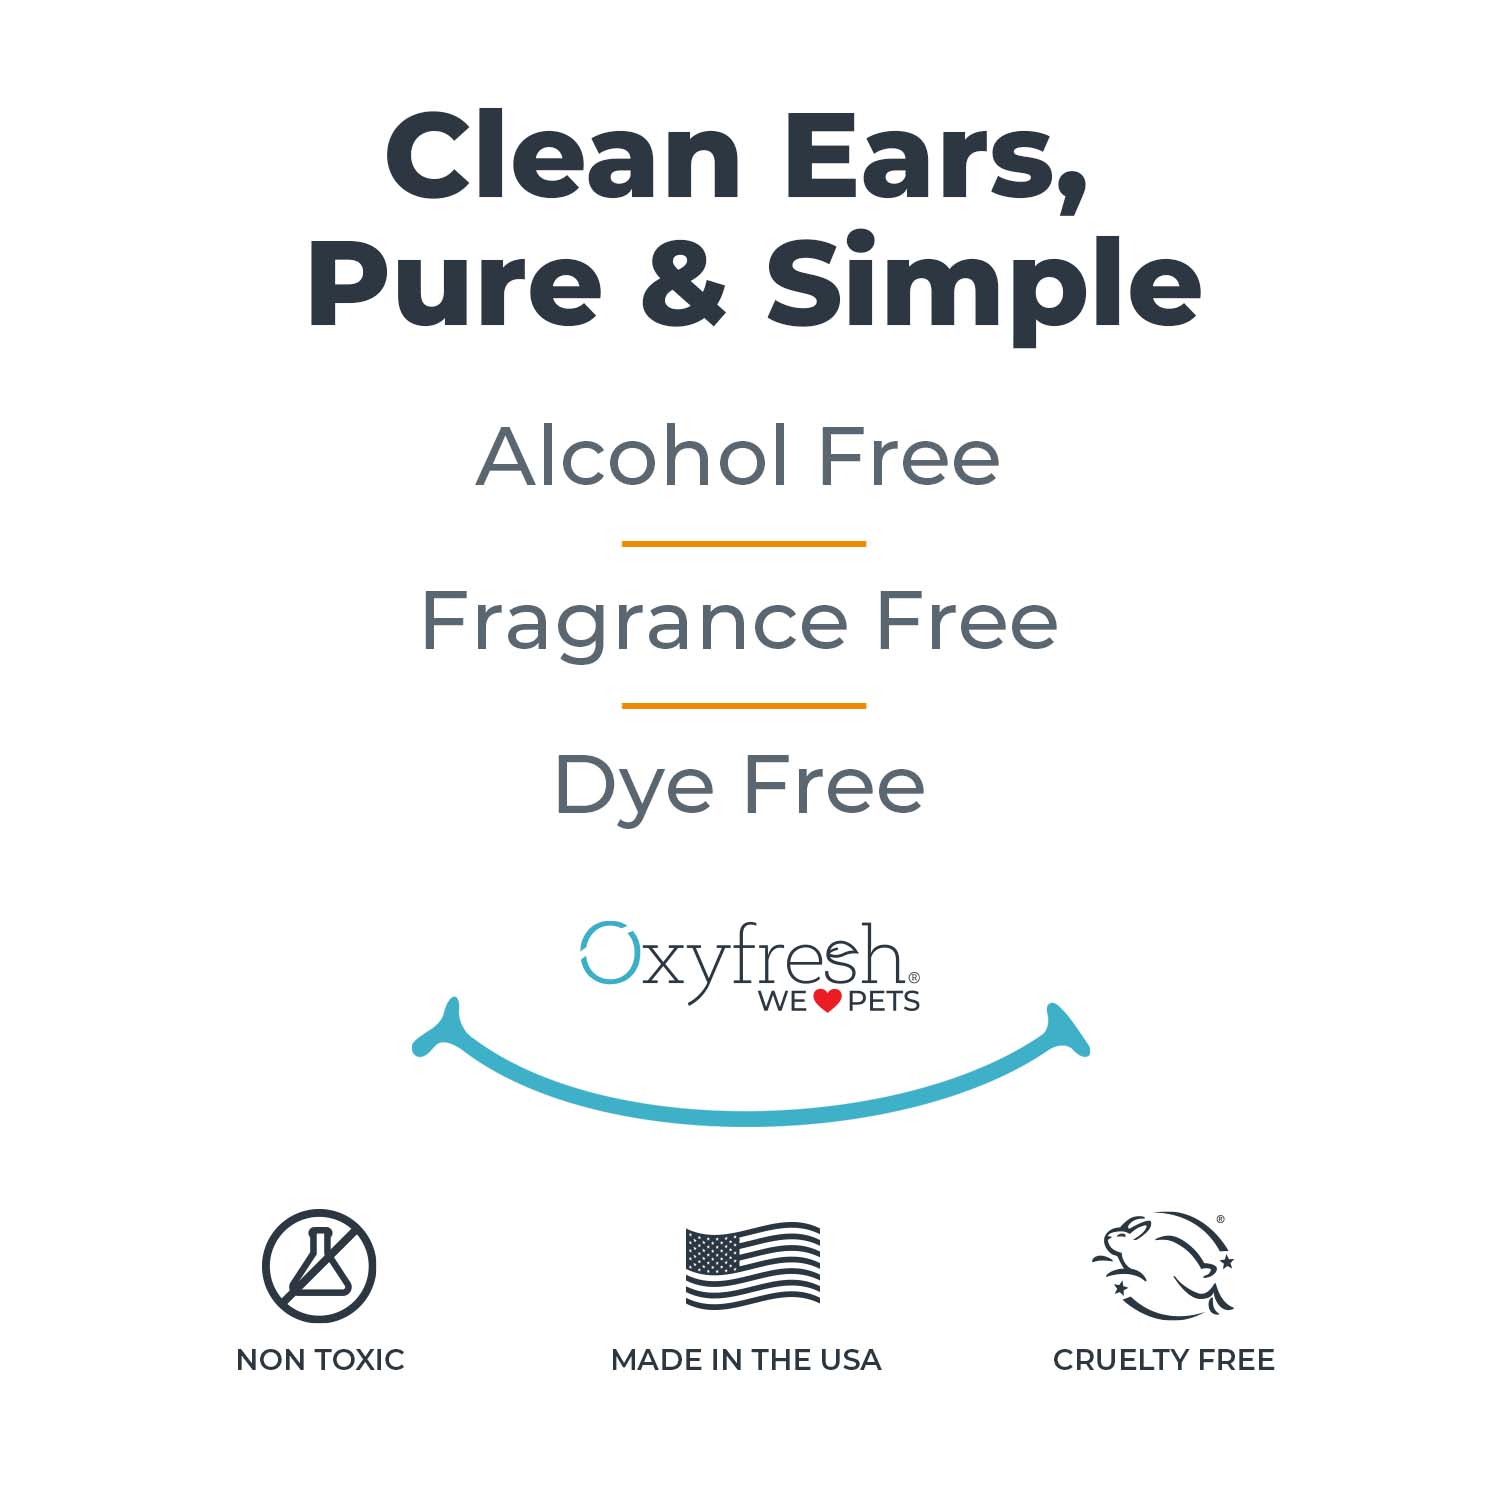 oxyfresh pet ear cleaner graphic that says clean ears pure & simple alcohol free fragrance free dye free non toxic made in the usa cruelty free